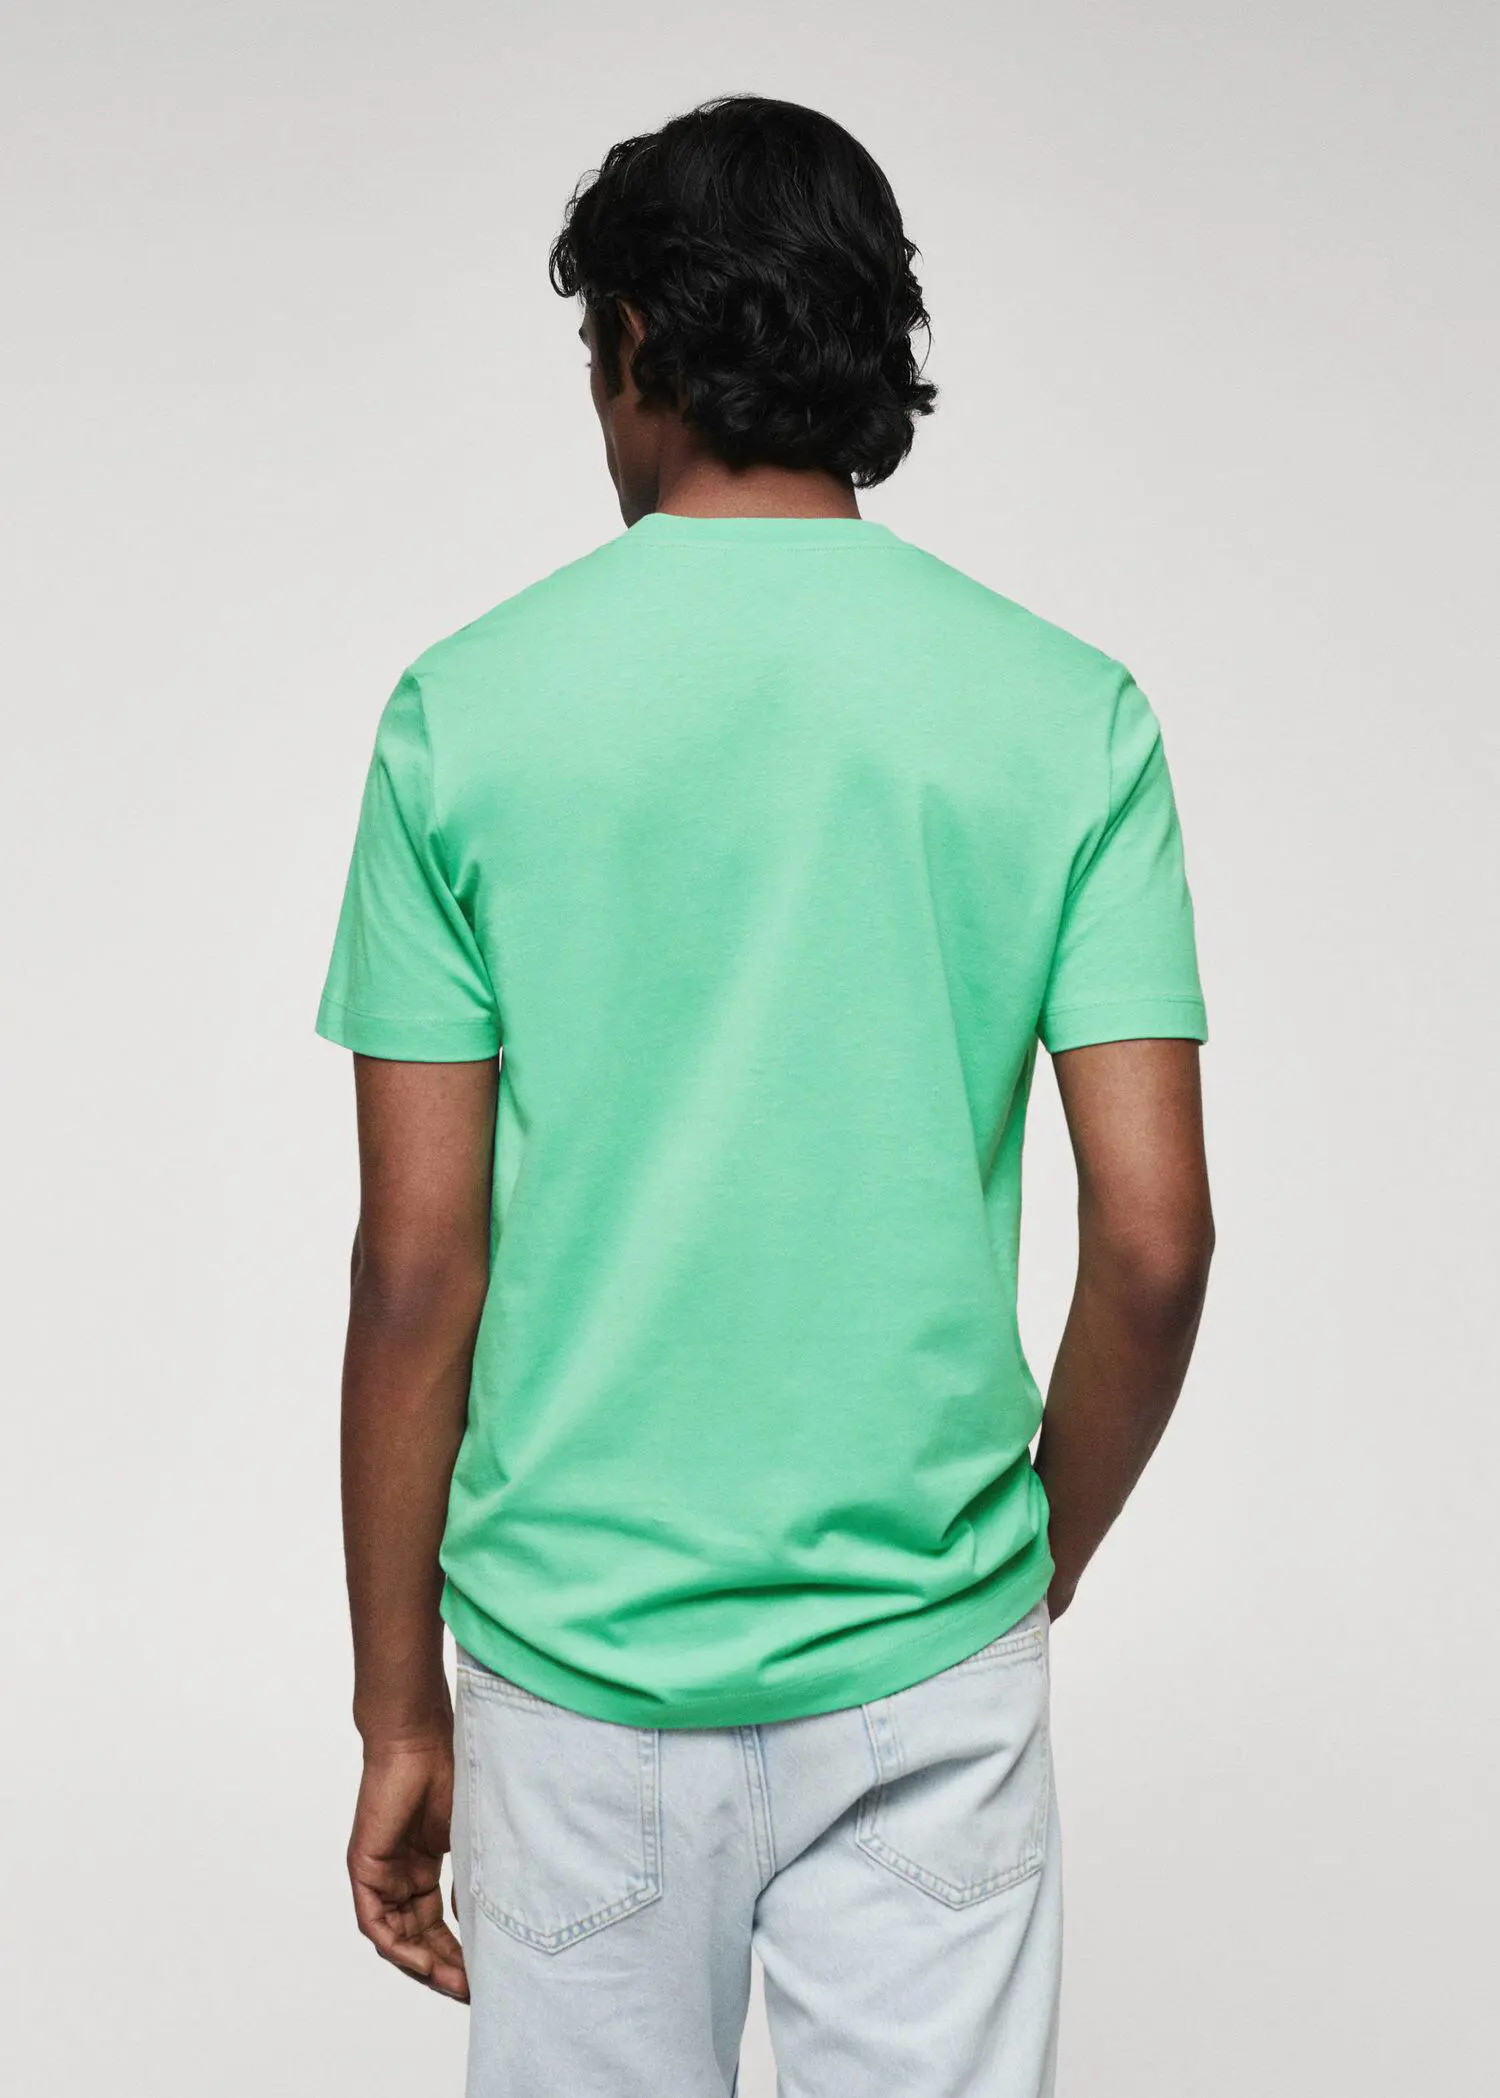 Mango 100% cotton V-neck t-shirt . a man in a green shirt is standing with his hands in his pockets. 